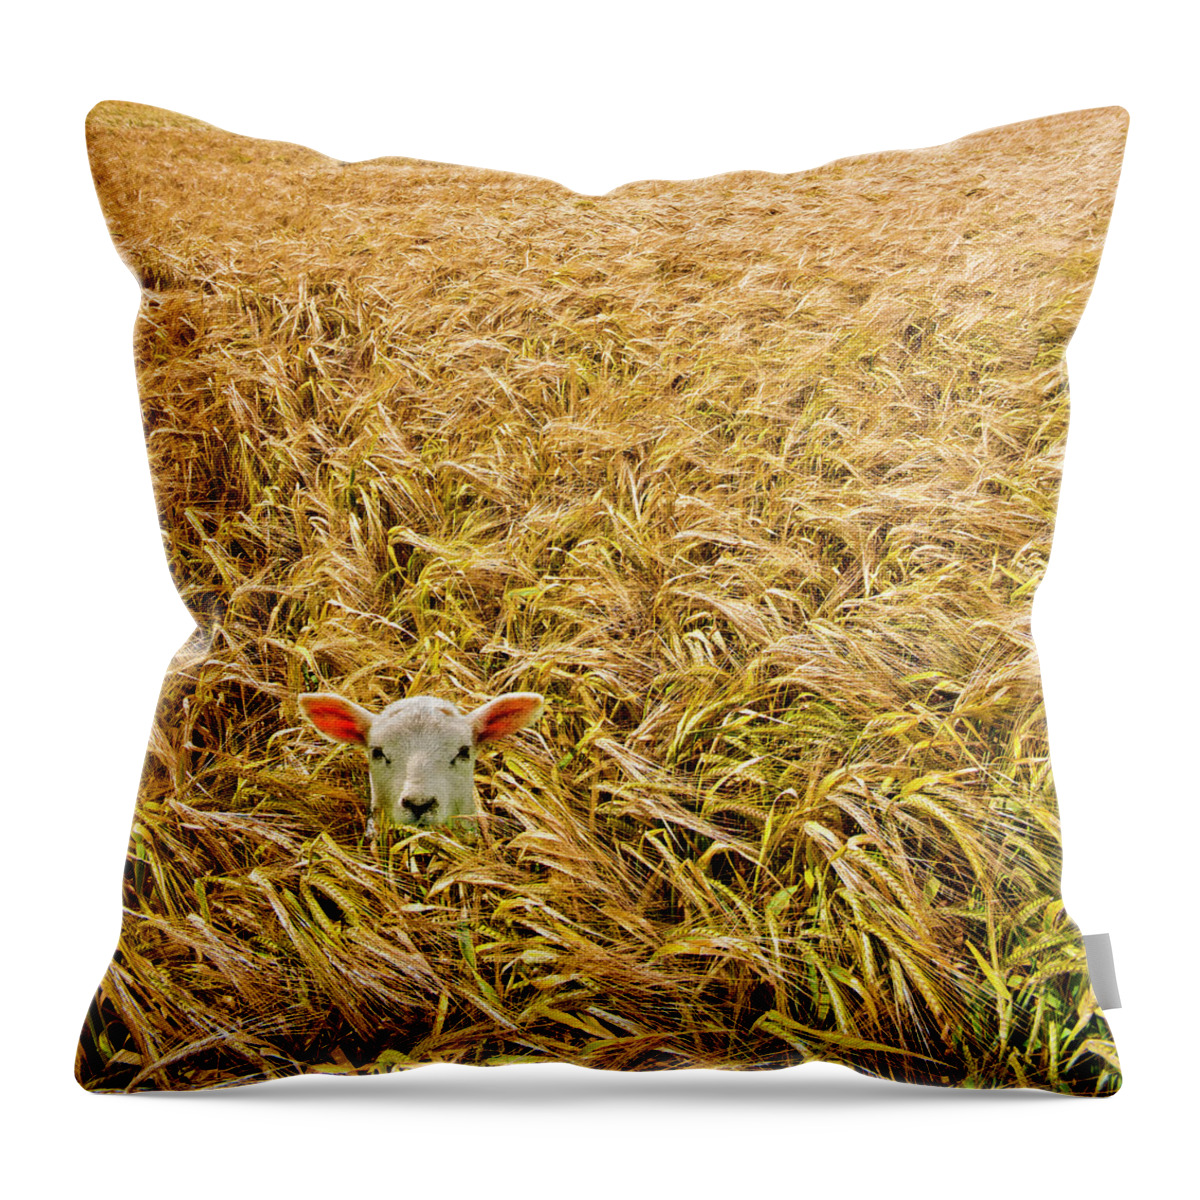 Sheep Throw Pillow featuring the photograph Lamb With Barley by Meirion Matthias